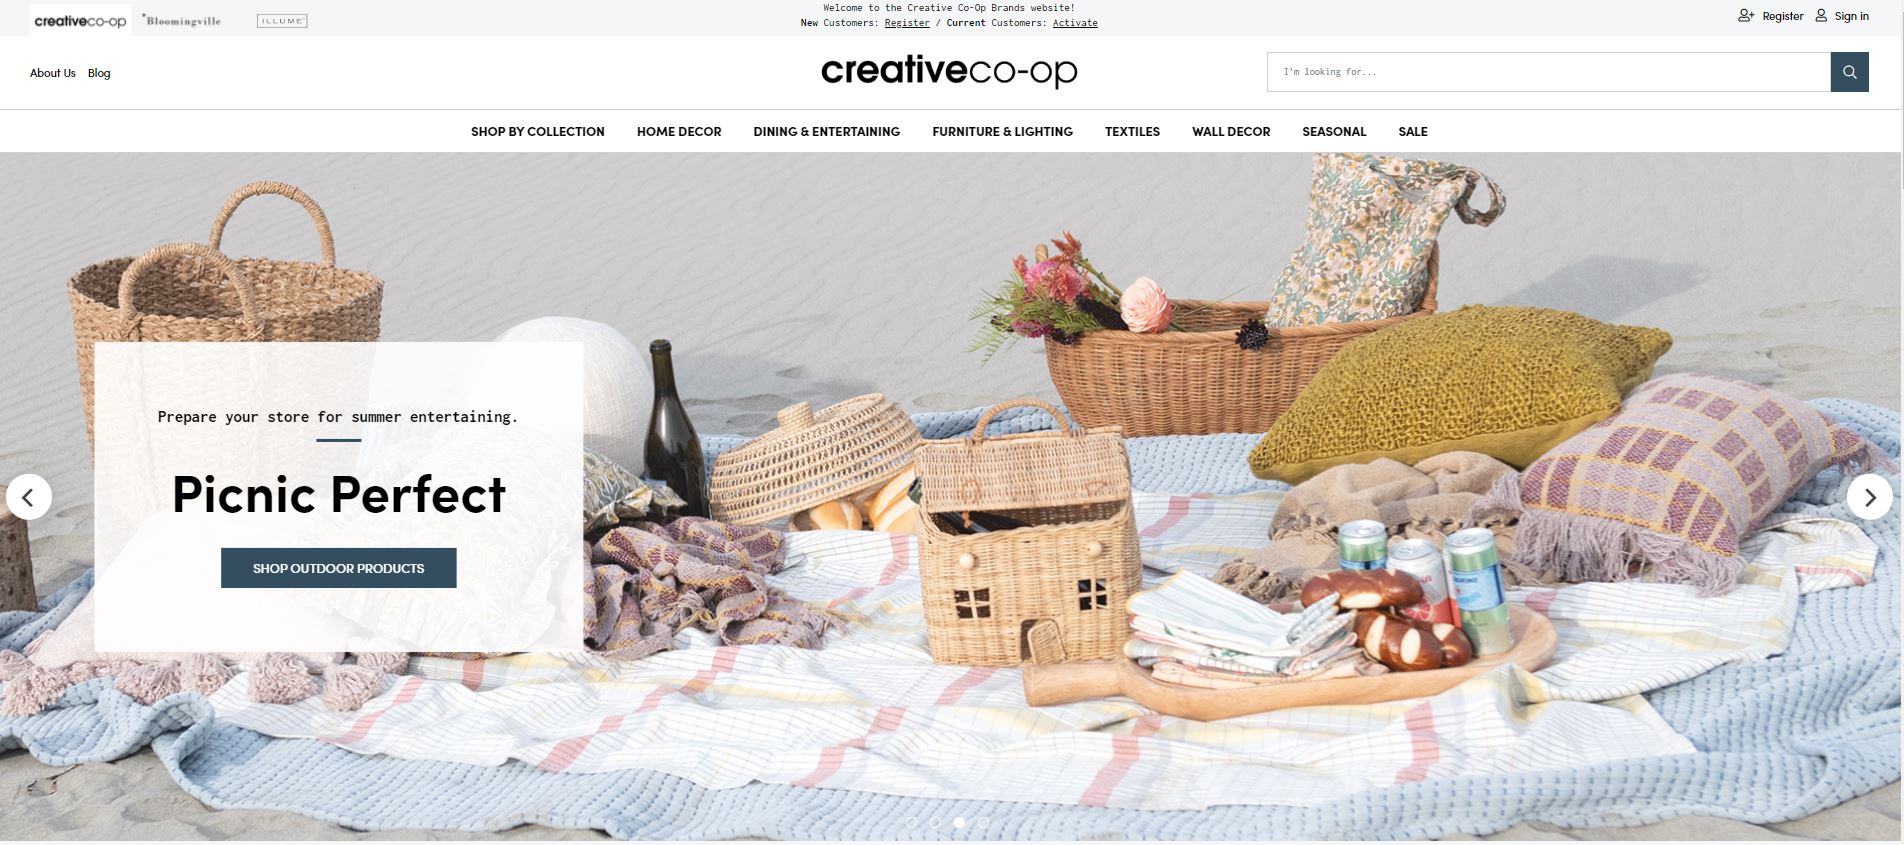 Creative Co-Op Releases Three Brand Websites In One Multi-site image